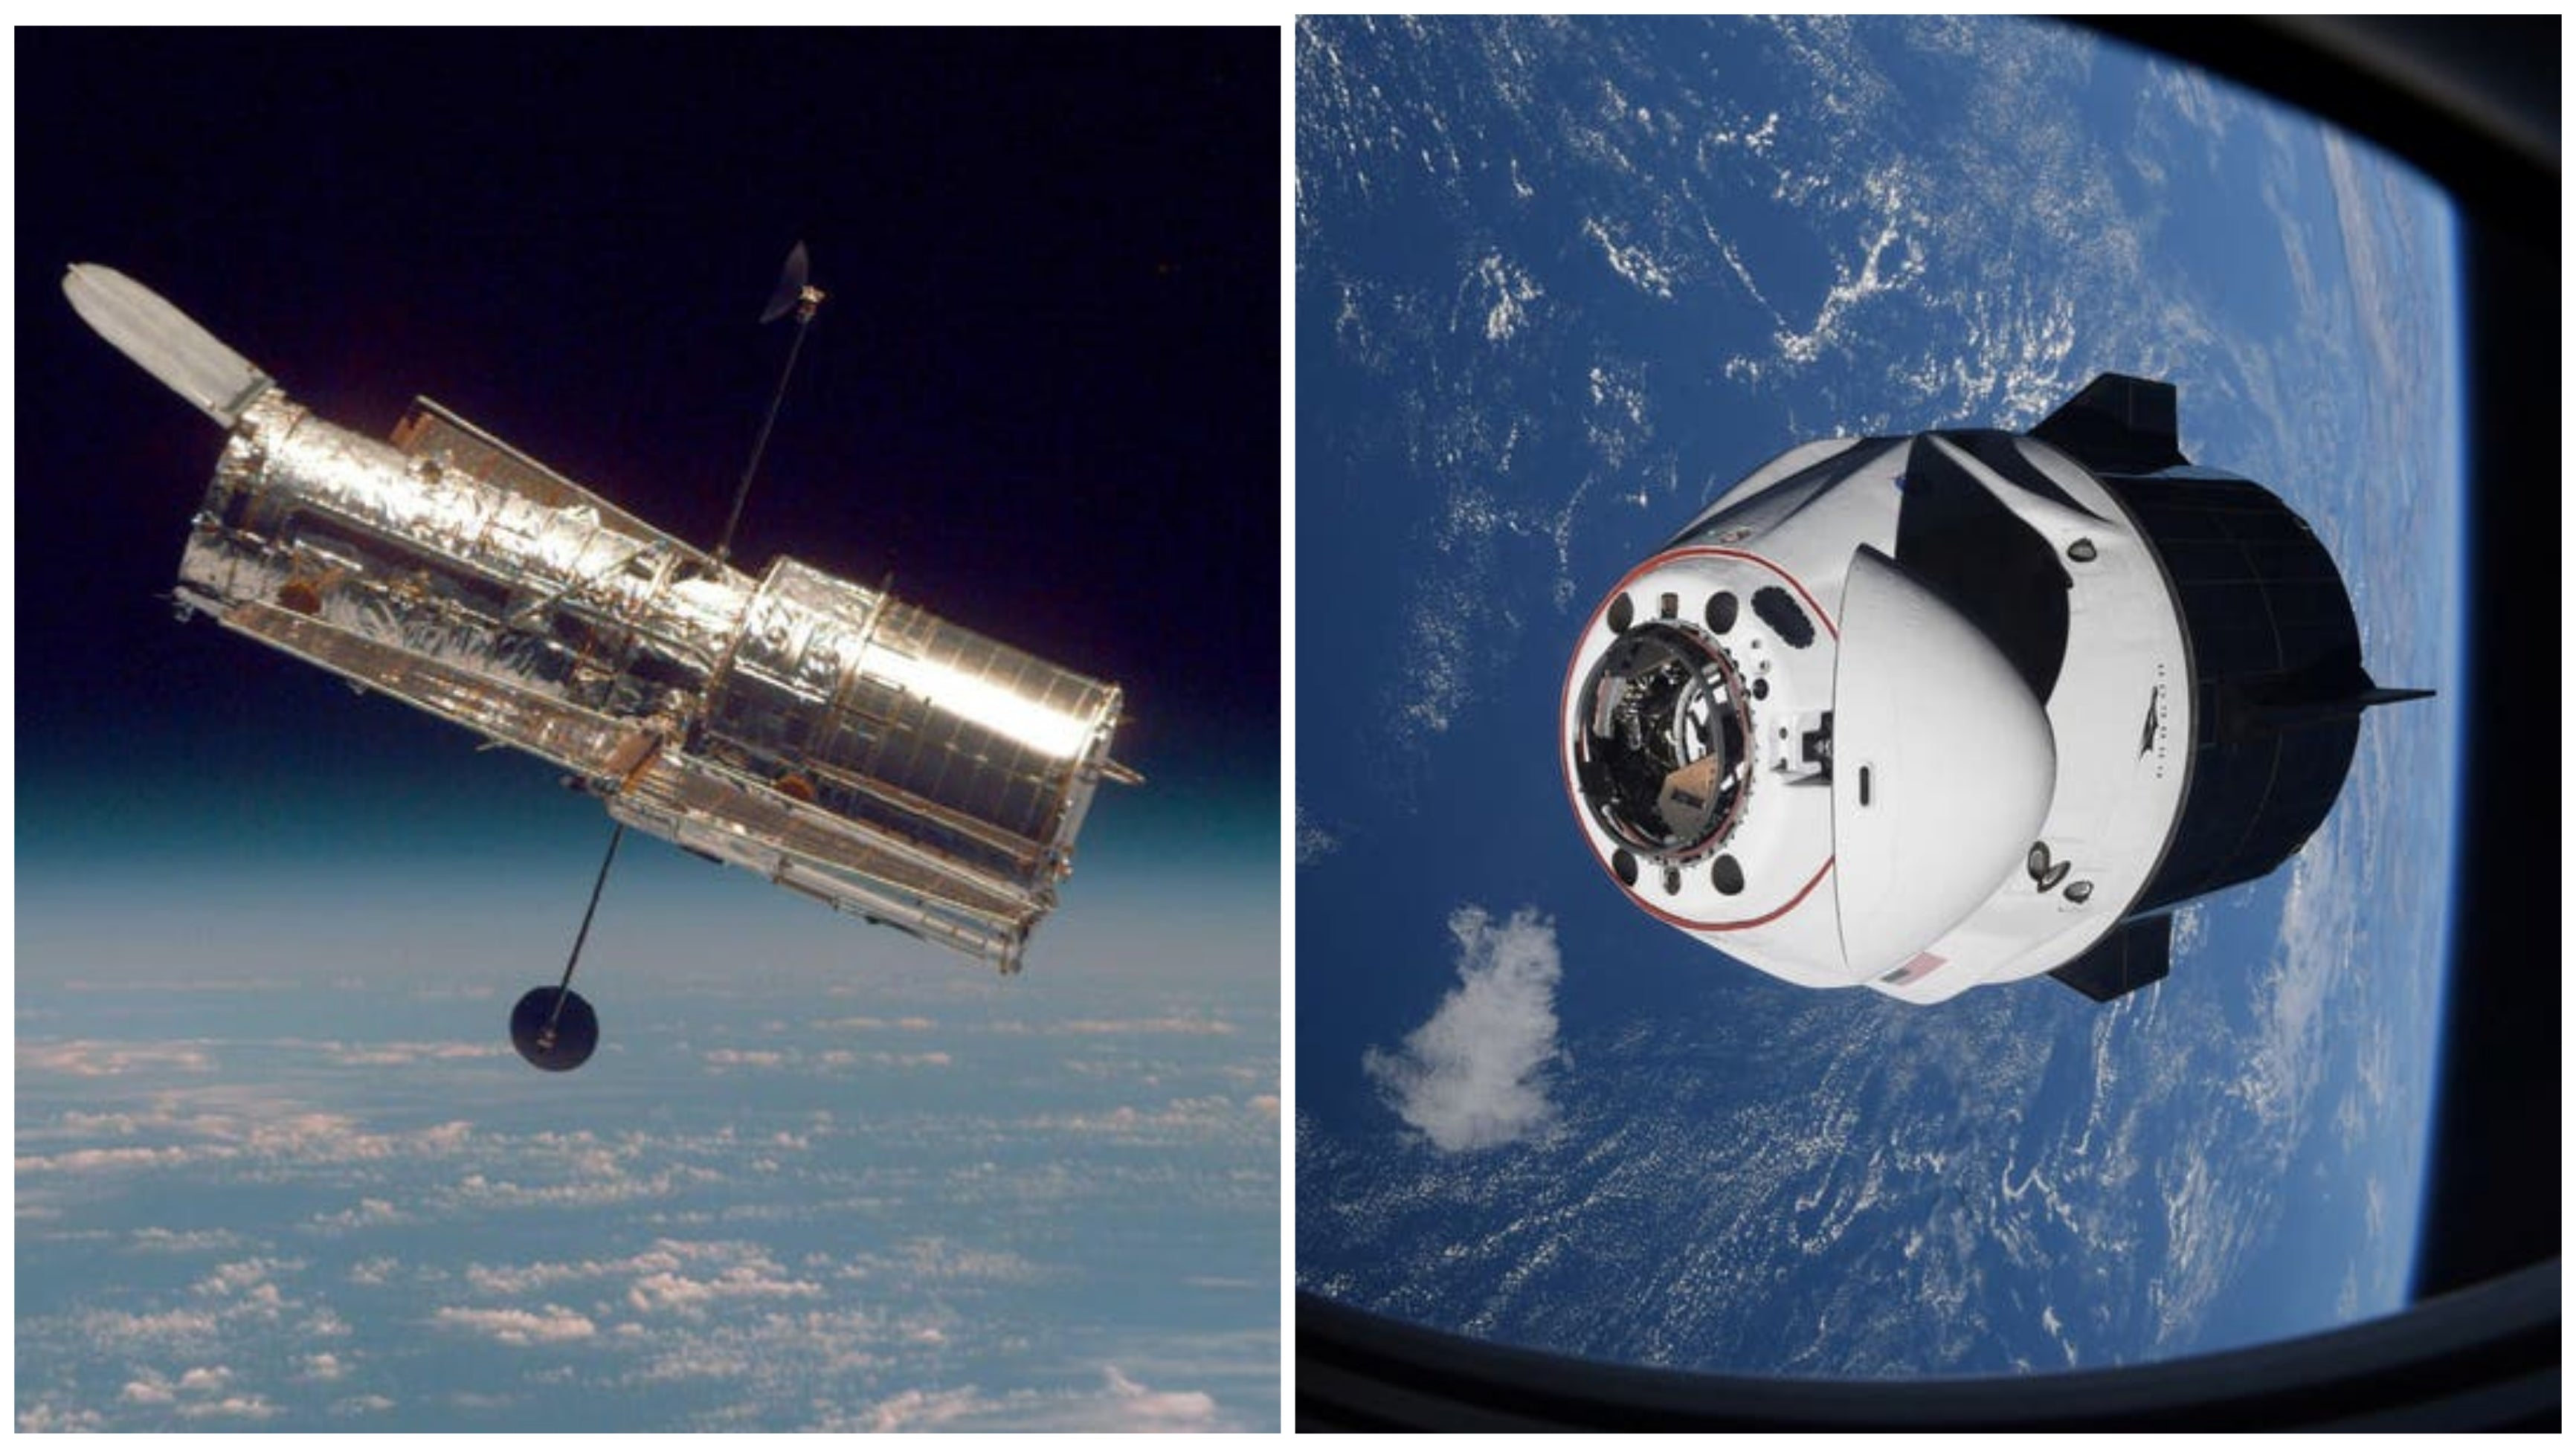 NASA & SpaceX will study the possibility of boosting the Hubble Space Telescope's altitude to extend its lifespan